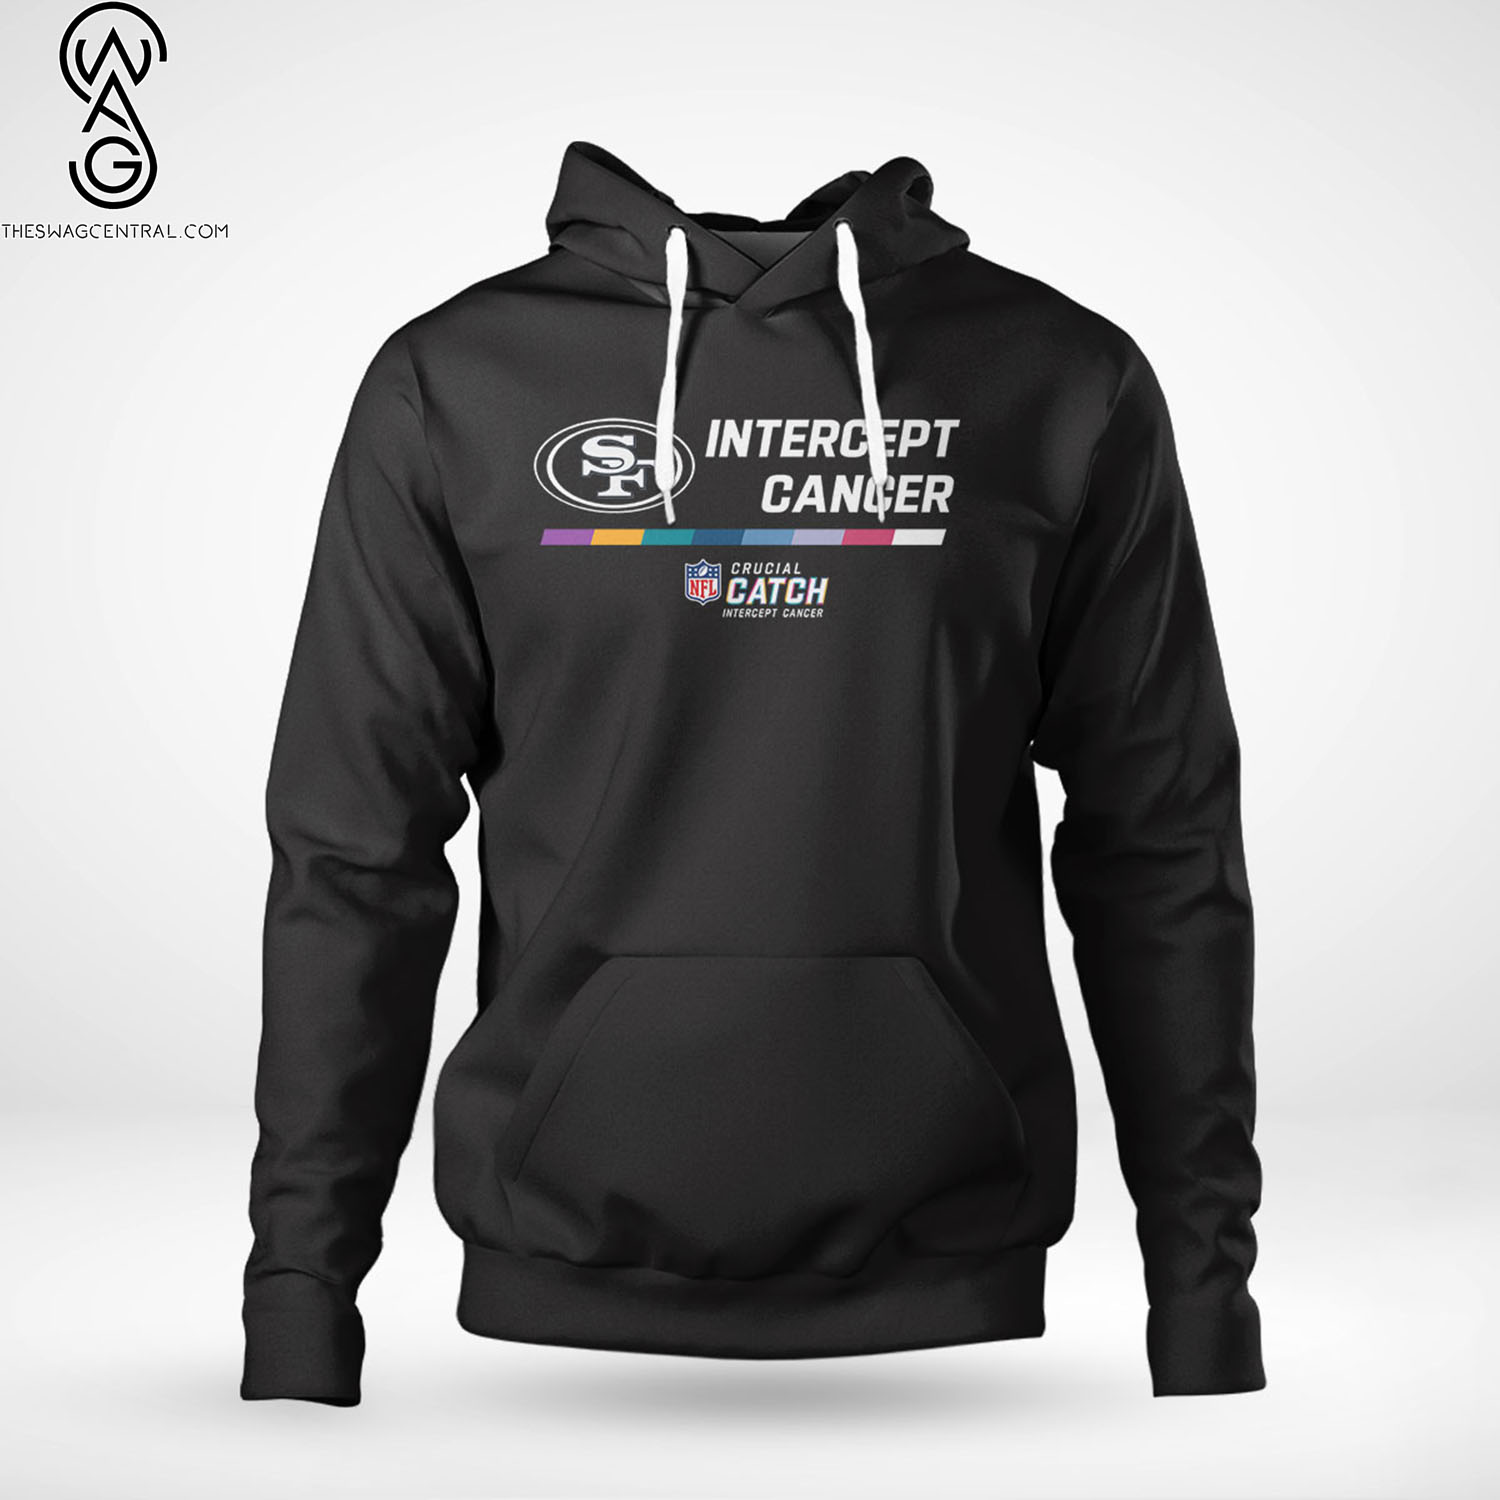 San Francisco 49ers NFL Intercept Cancer Crucial Catch Therma Performance Hoodie